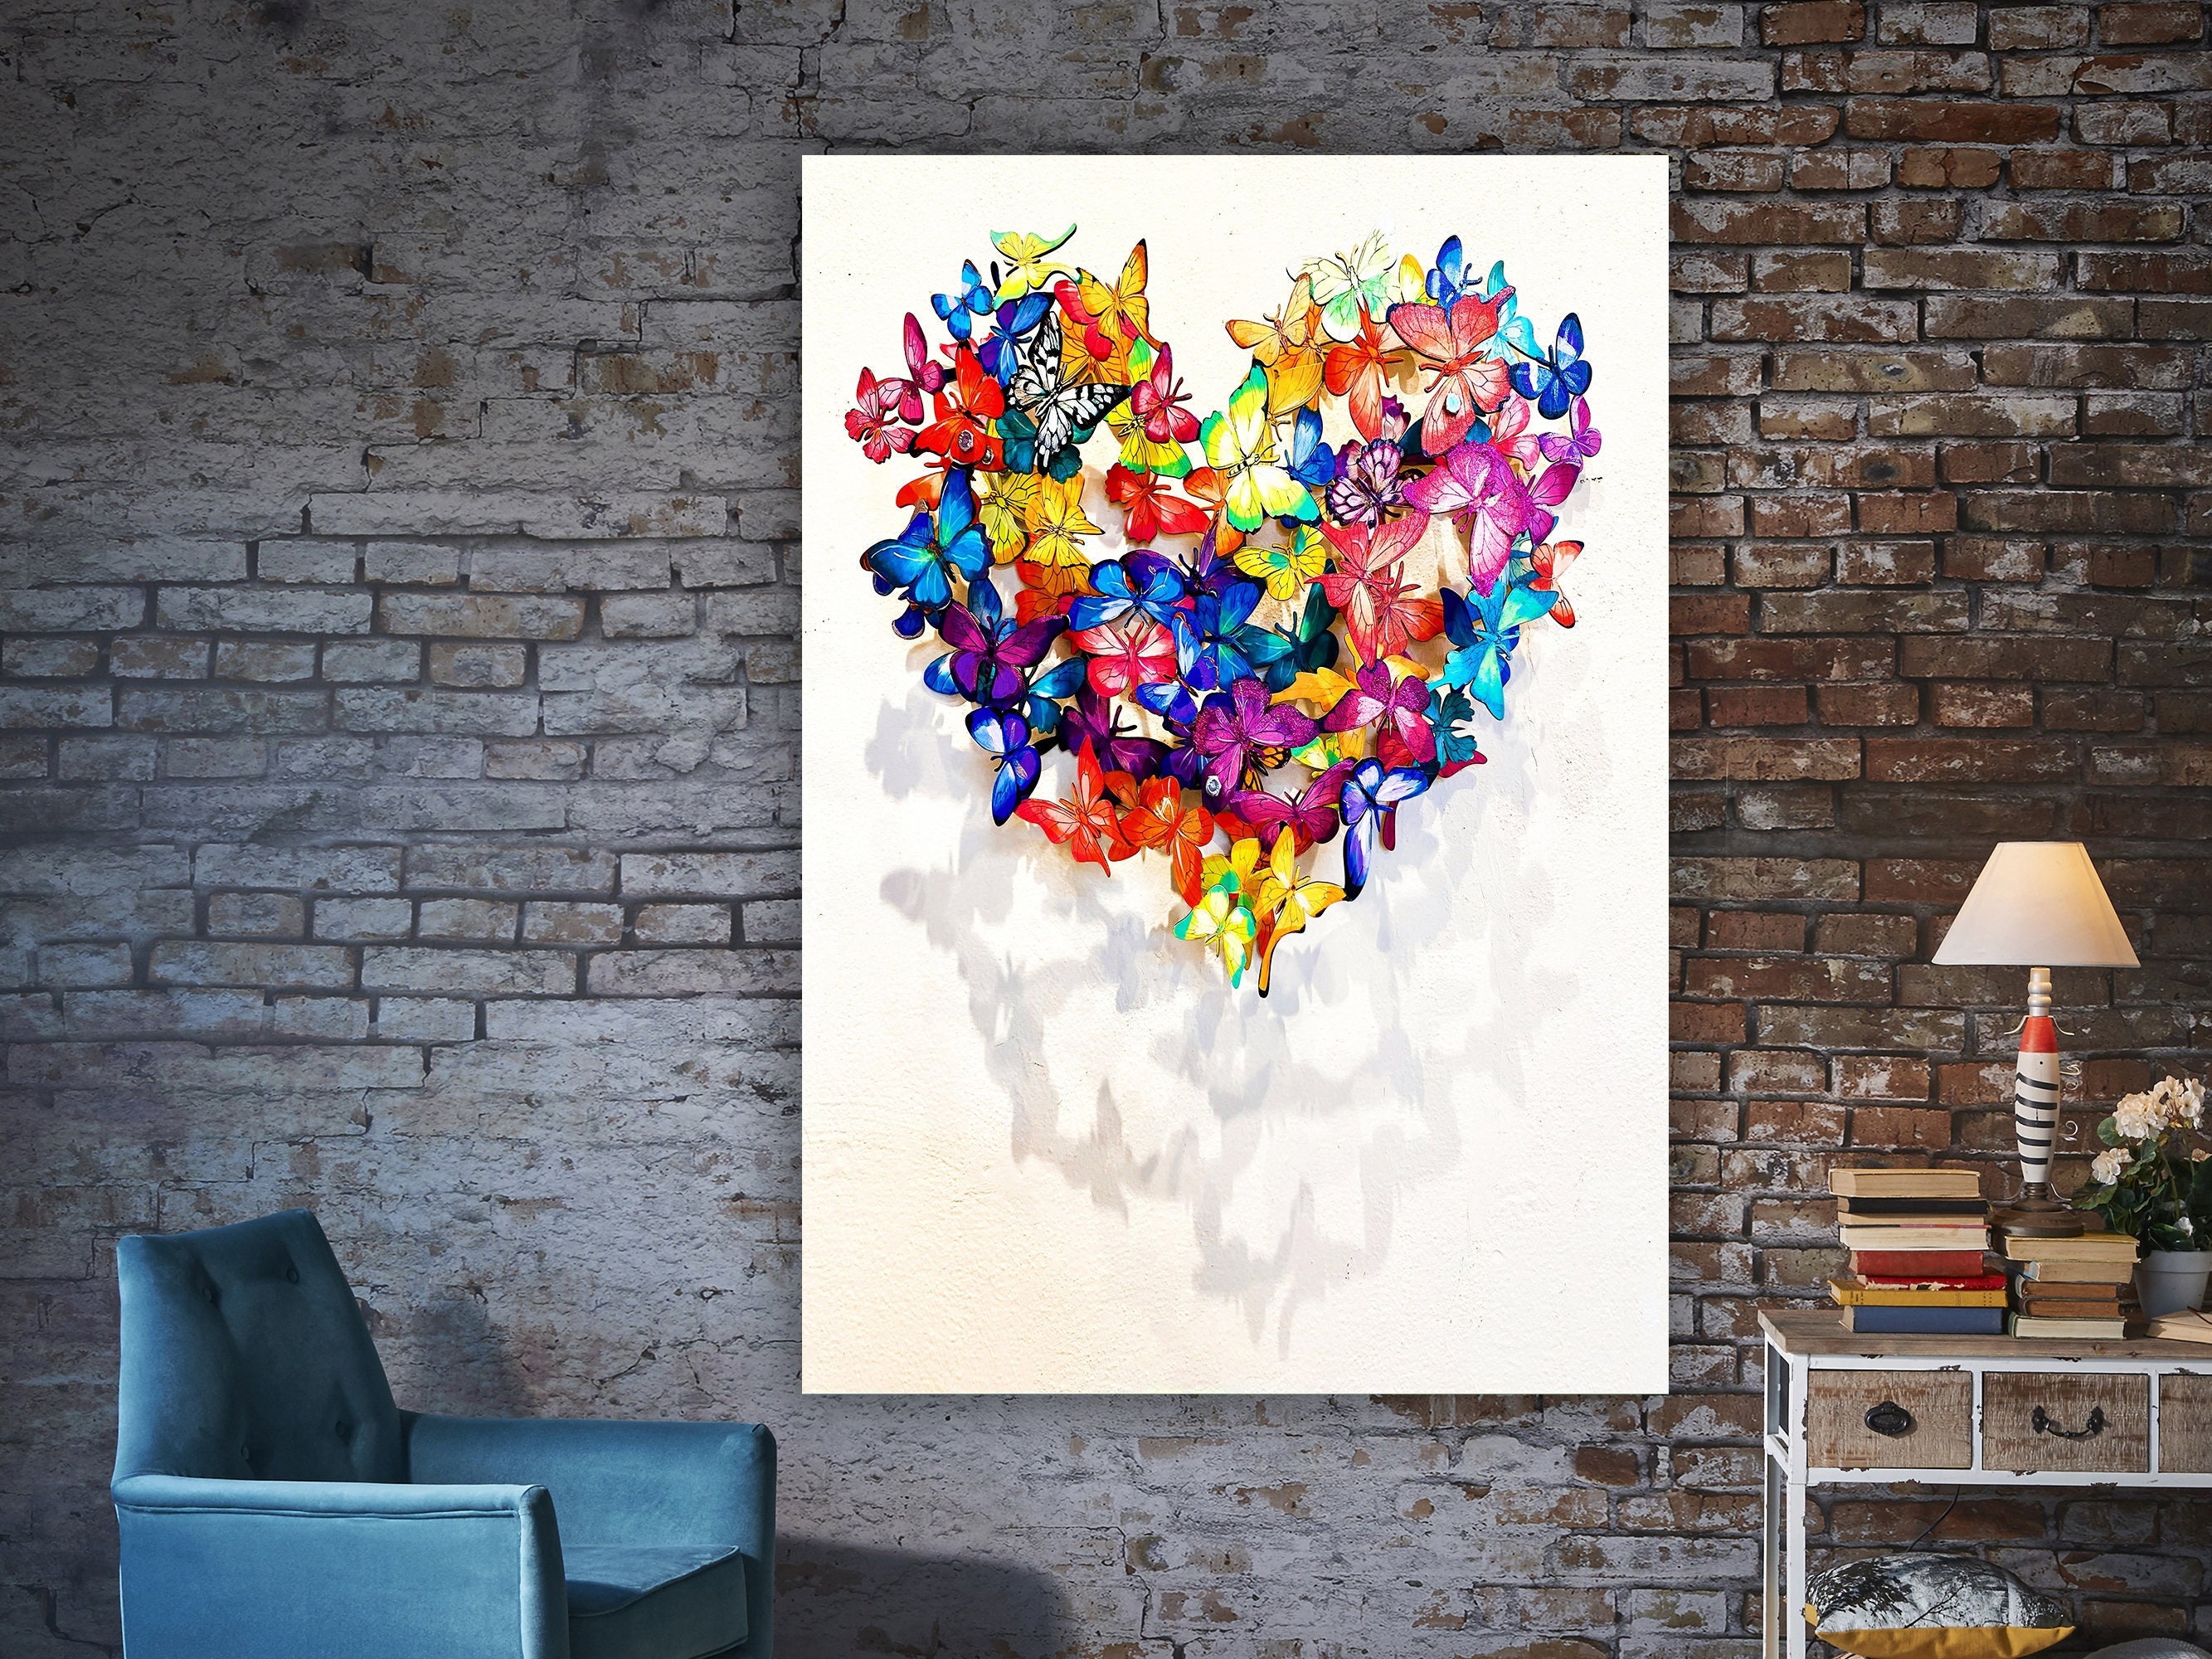 Heart Canvas on Frame Blank and Stretched 2 Sizes Artist Painting Supply 